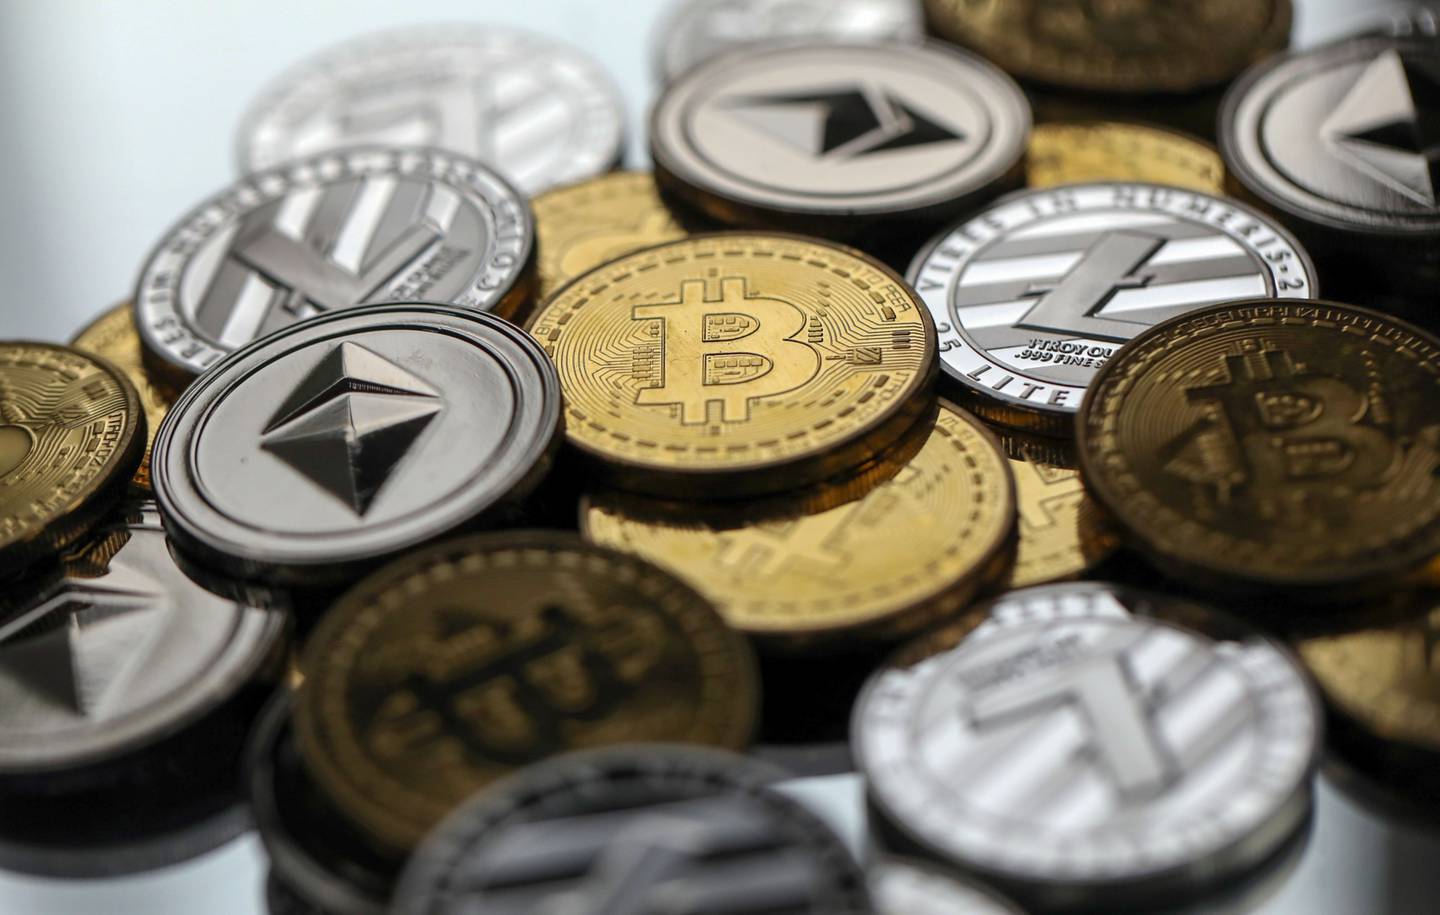 A collection of bitcoin, litecoin and ethereum tokens sit in this arranged photograph in Danbury, U.K., on Tuesday, Oct. 17, 2017. On Wednesday, billionaire Warren Buffett said on CNBC that most digital coins won't hold their value.